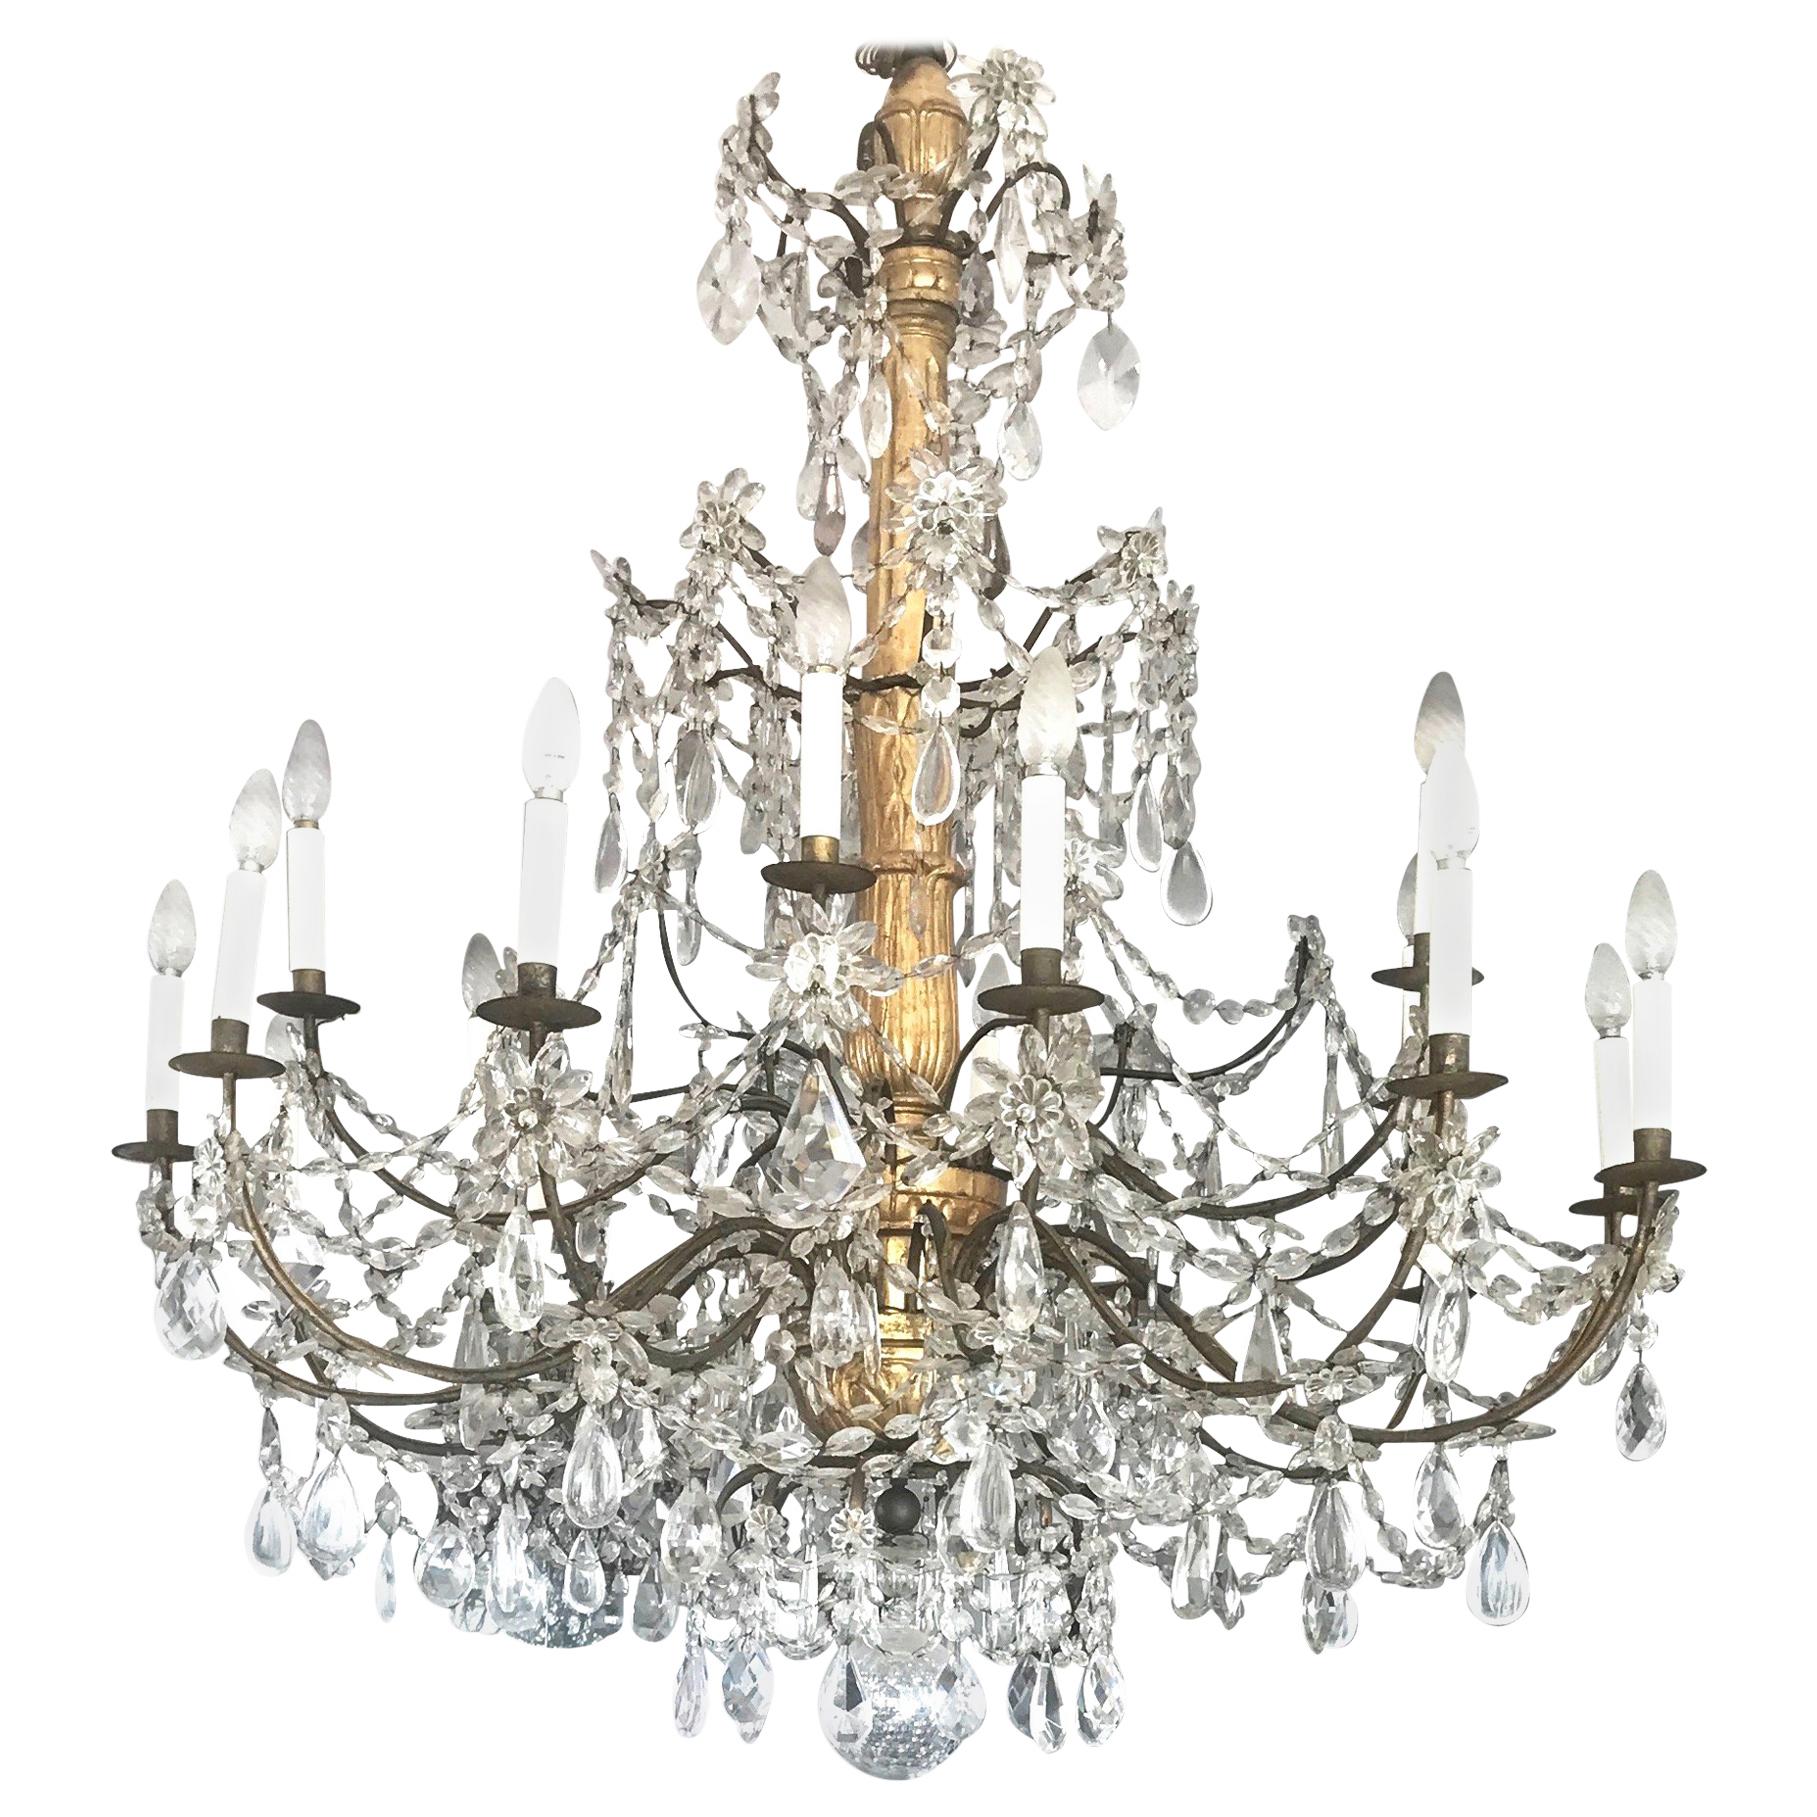 Italian Giltwood and Crystal Chandelier 18th Century Great Beauty